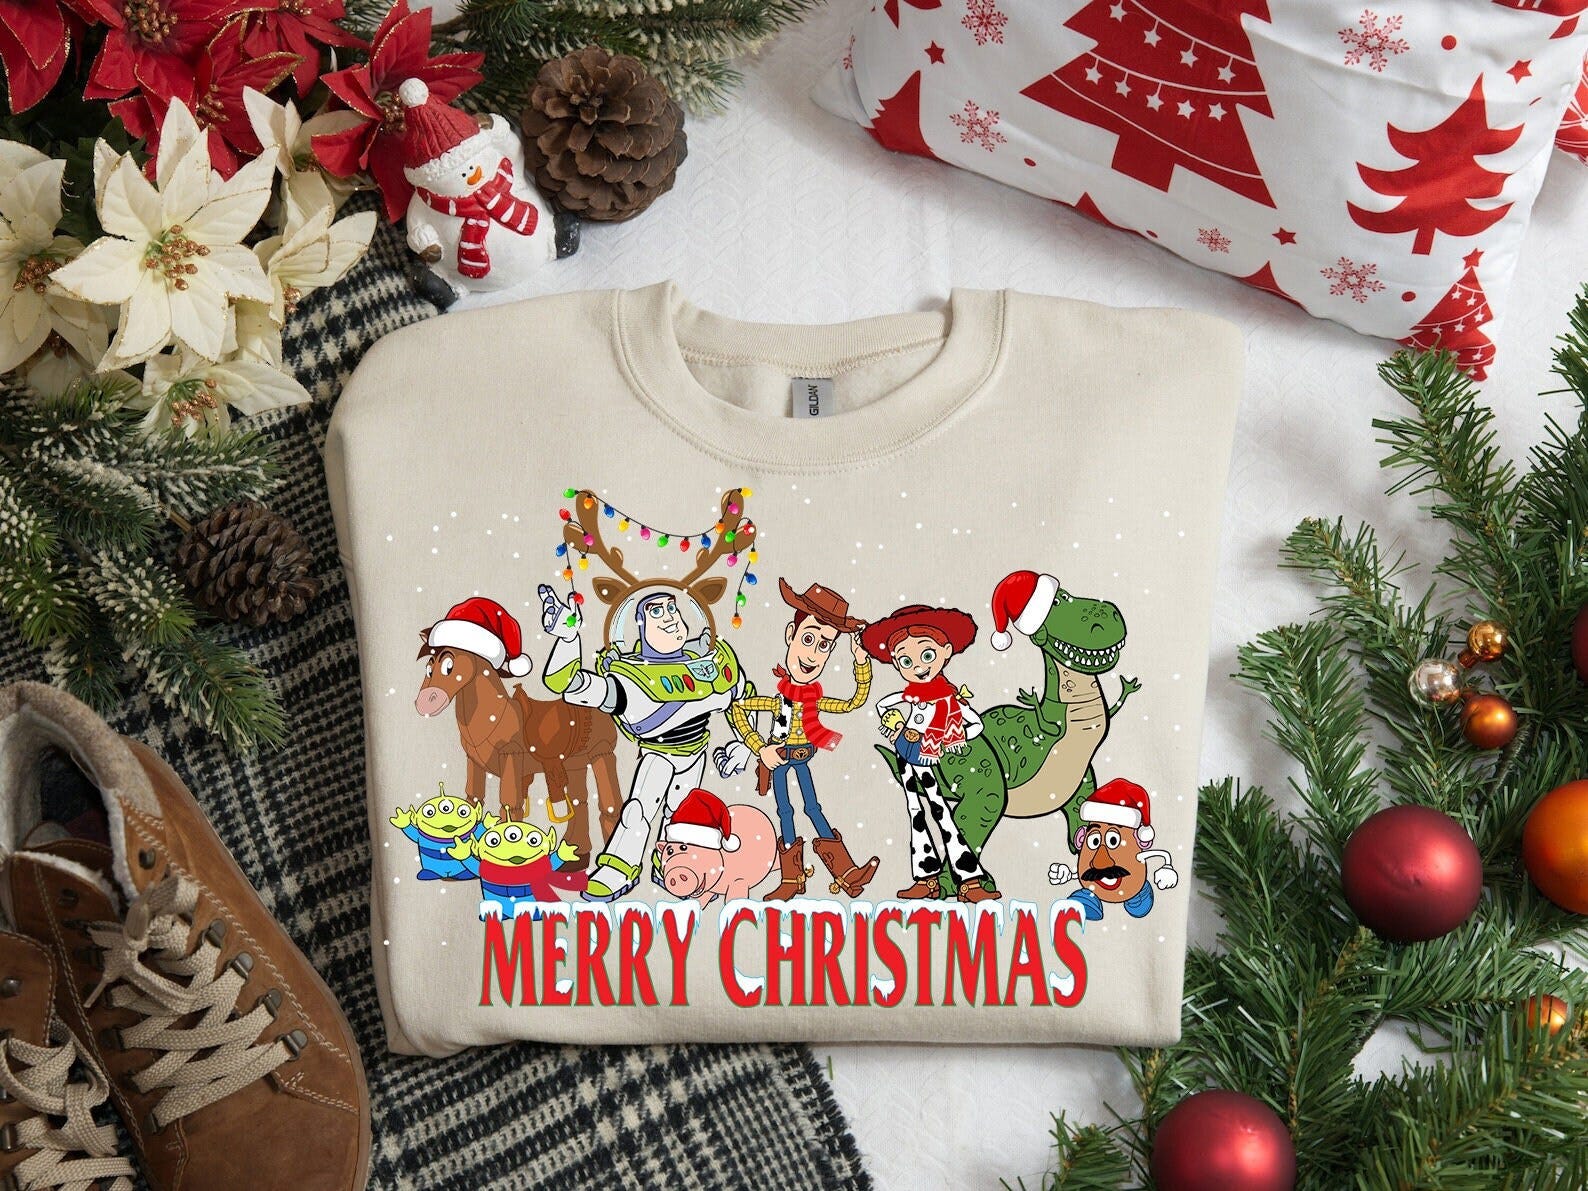 Funny Merry Christmas Png, Cartoon Character Christmas Png, Christmas Friends Png, Christmas Squad Png,Magic Kingdom Png, Buzz, Woody Png